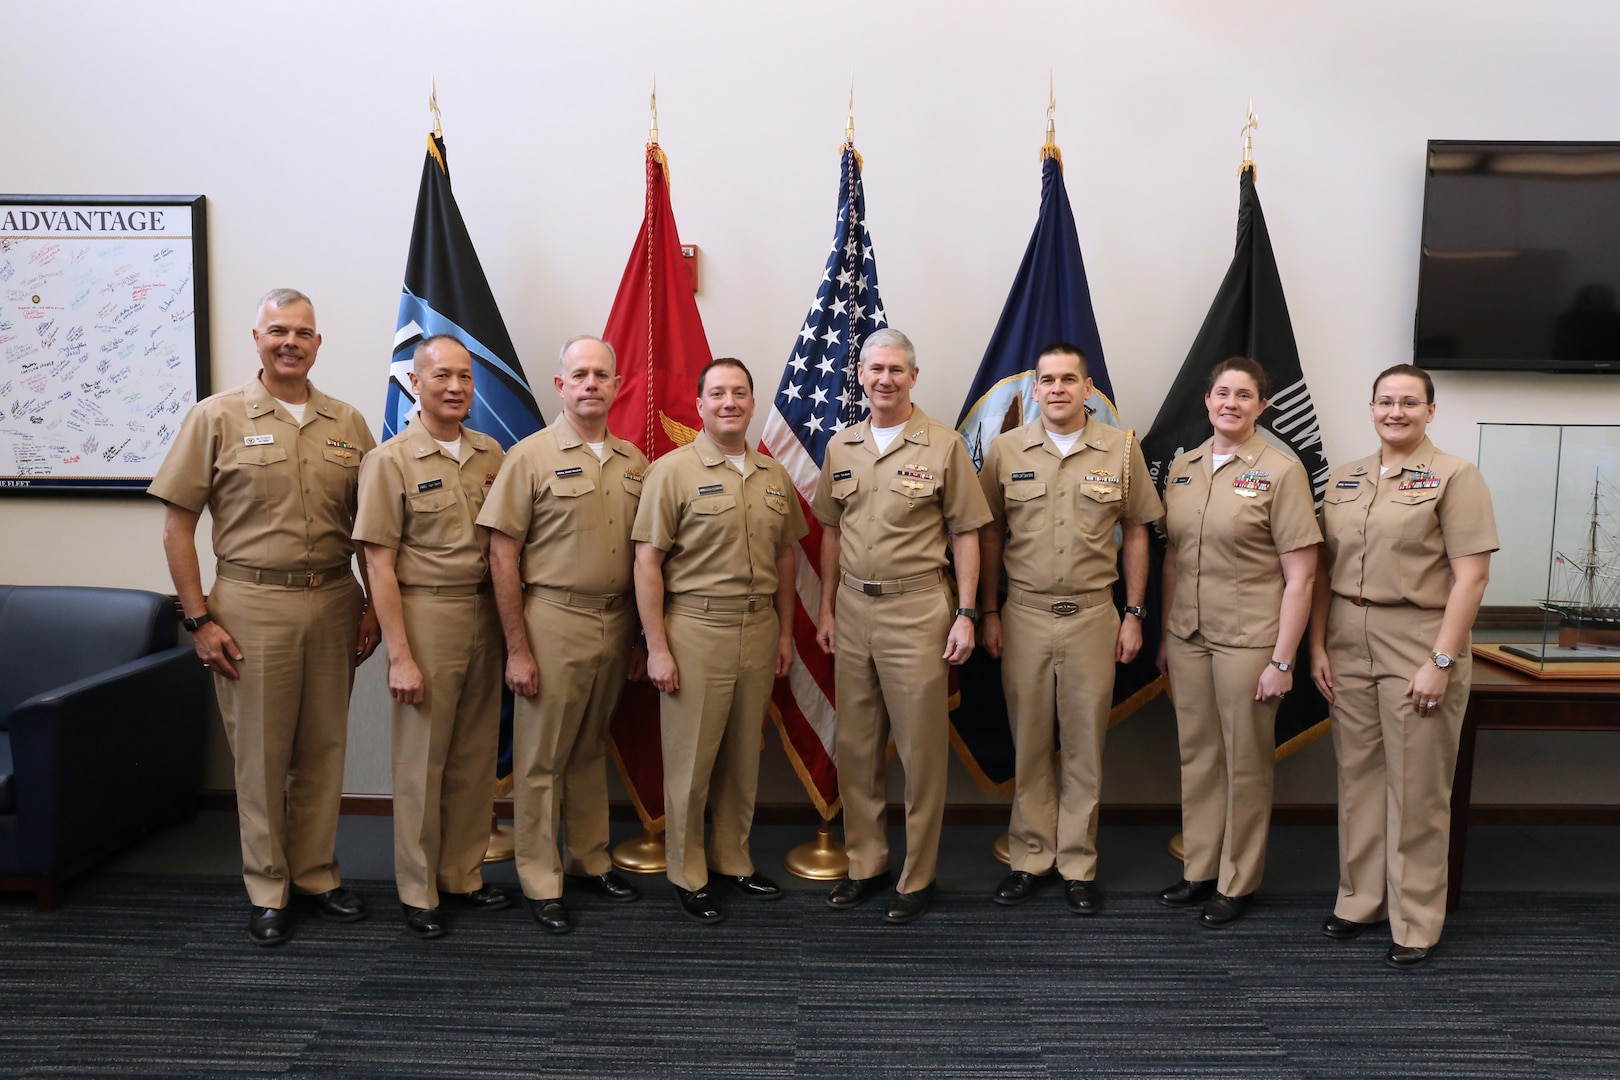 Naval Sea Systems Command (NAVSEA) Commander Vice Adm. Tom Moore (center) with the first group of Navy officers to wear the Engineering Duty Officer (EDO) qualification insignia Jan. 8, 2018 at the Washington Navy Yard.